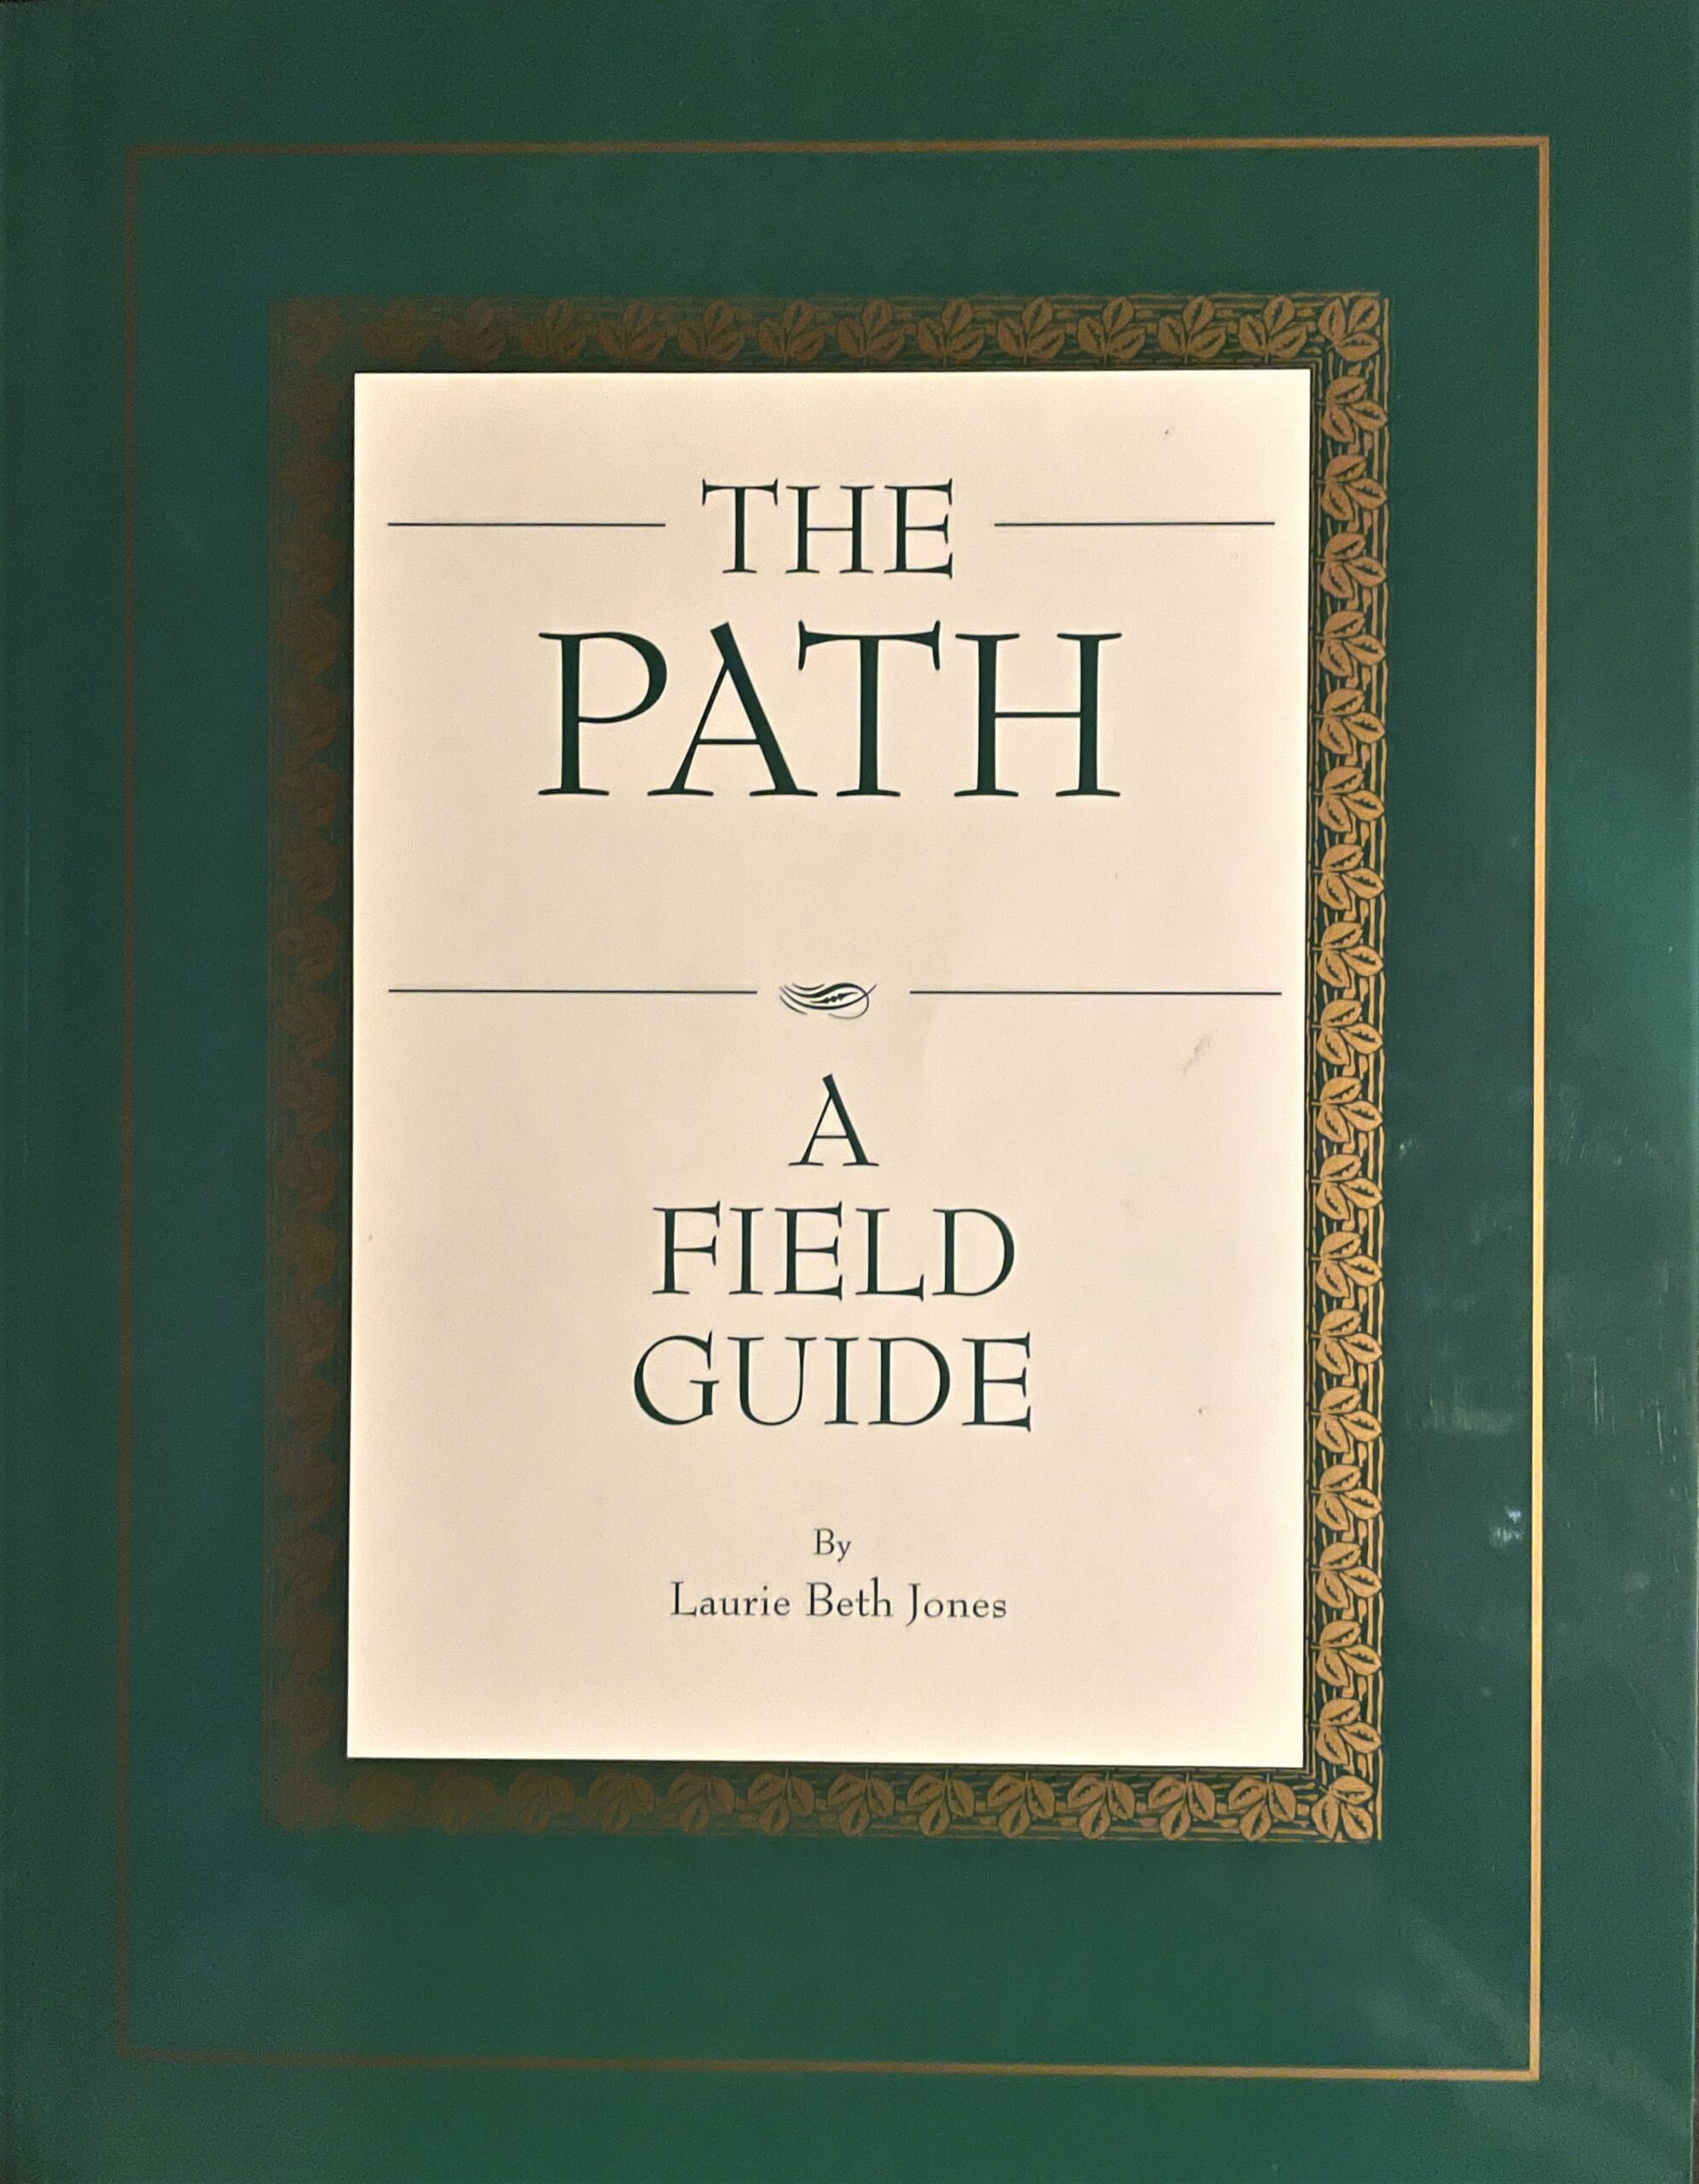 Mission and Purpose Guide and Workbook ( THE PATH)